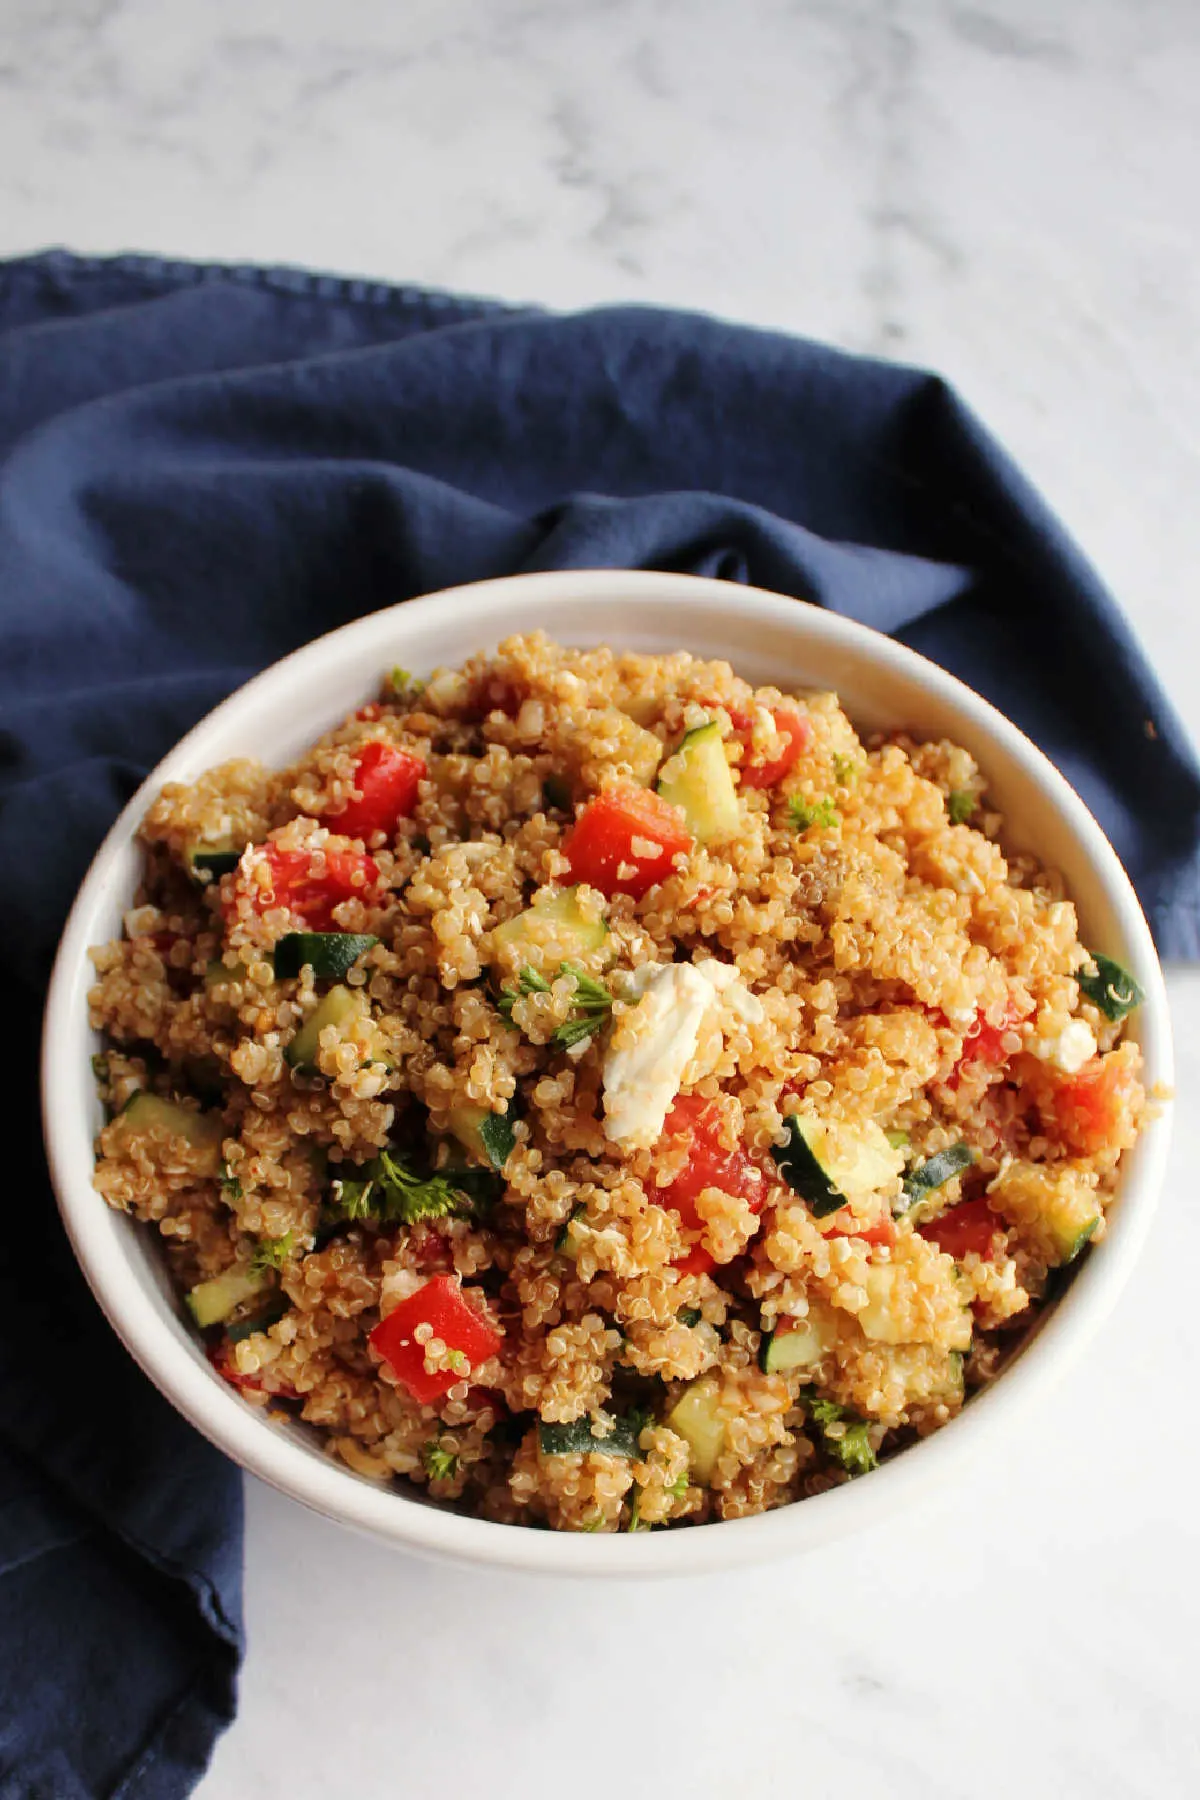 Large white serving bowl filled with quinoa salad with tomatoes, cucumbers and feta cheese.